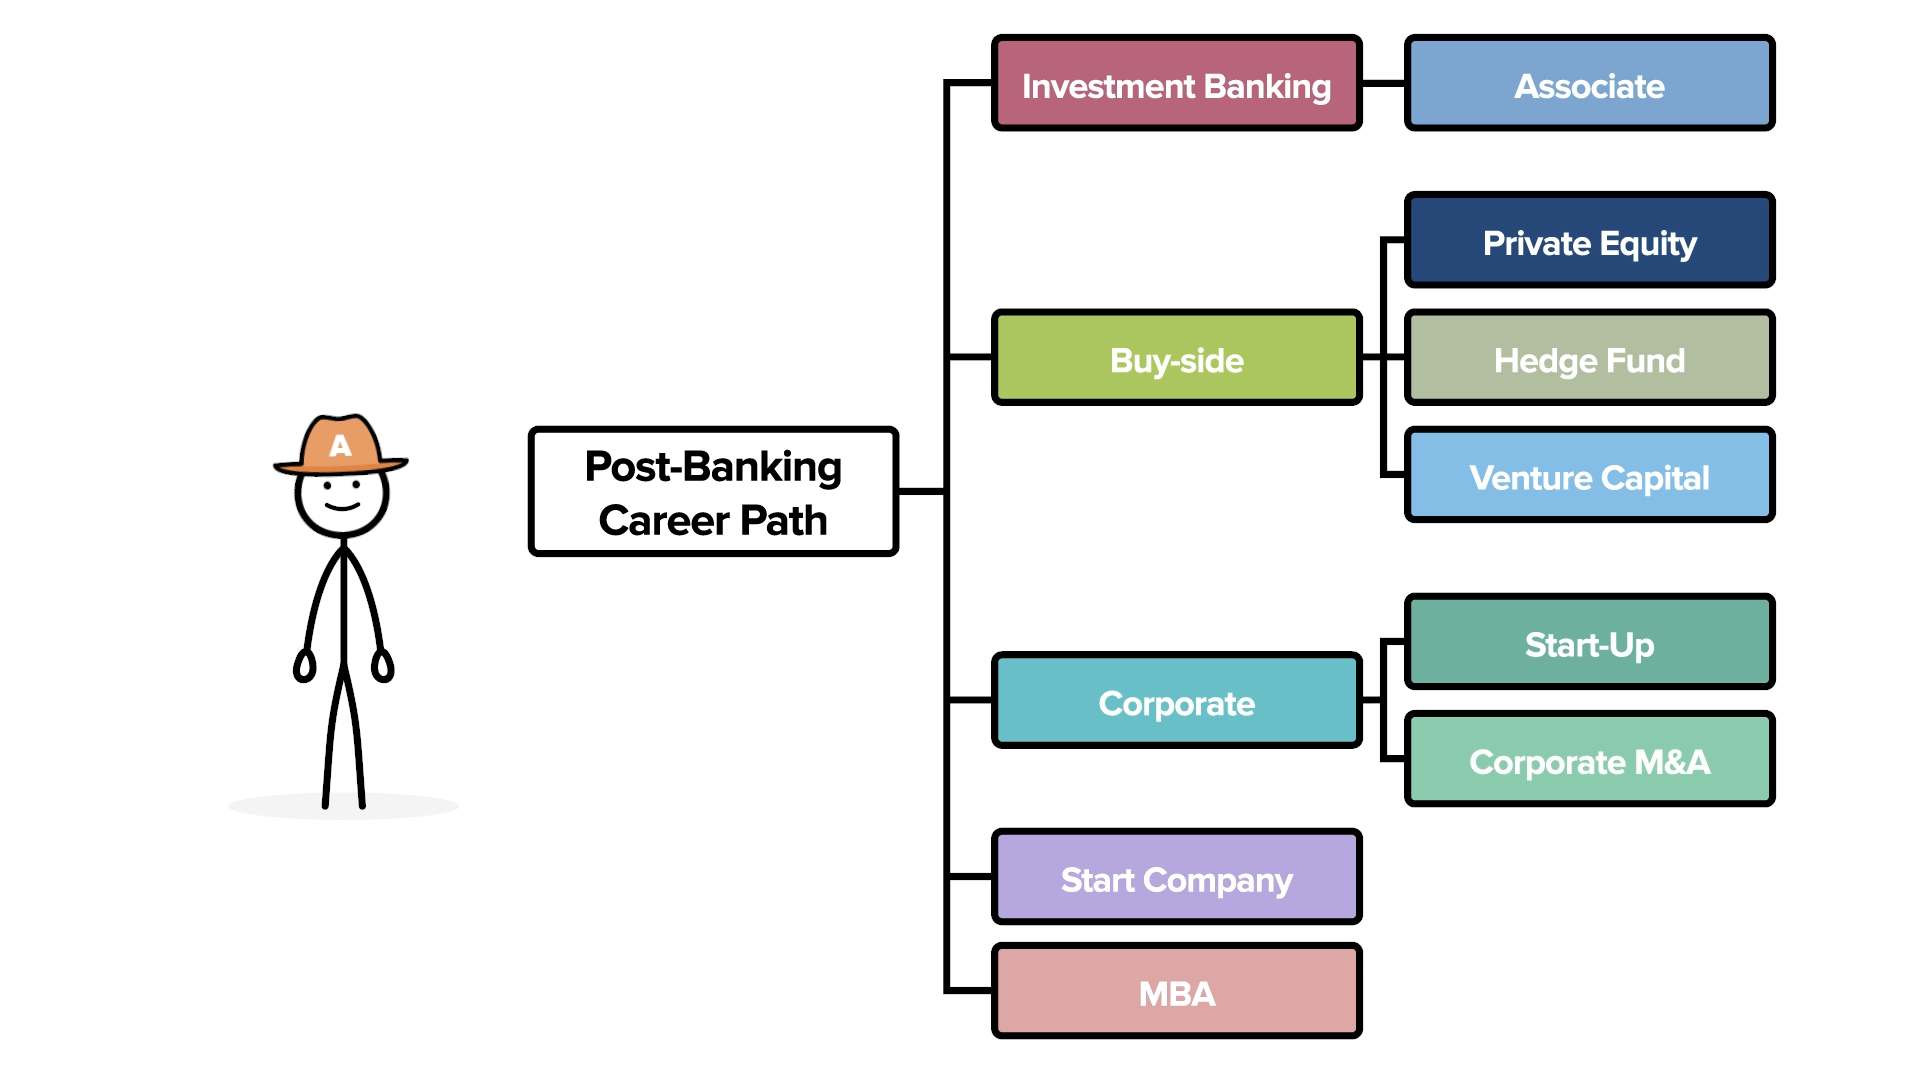 An image showing the most common careers after the Investment Banking Analyst role